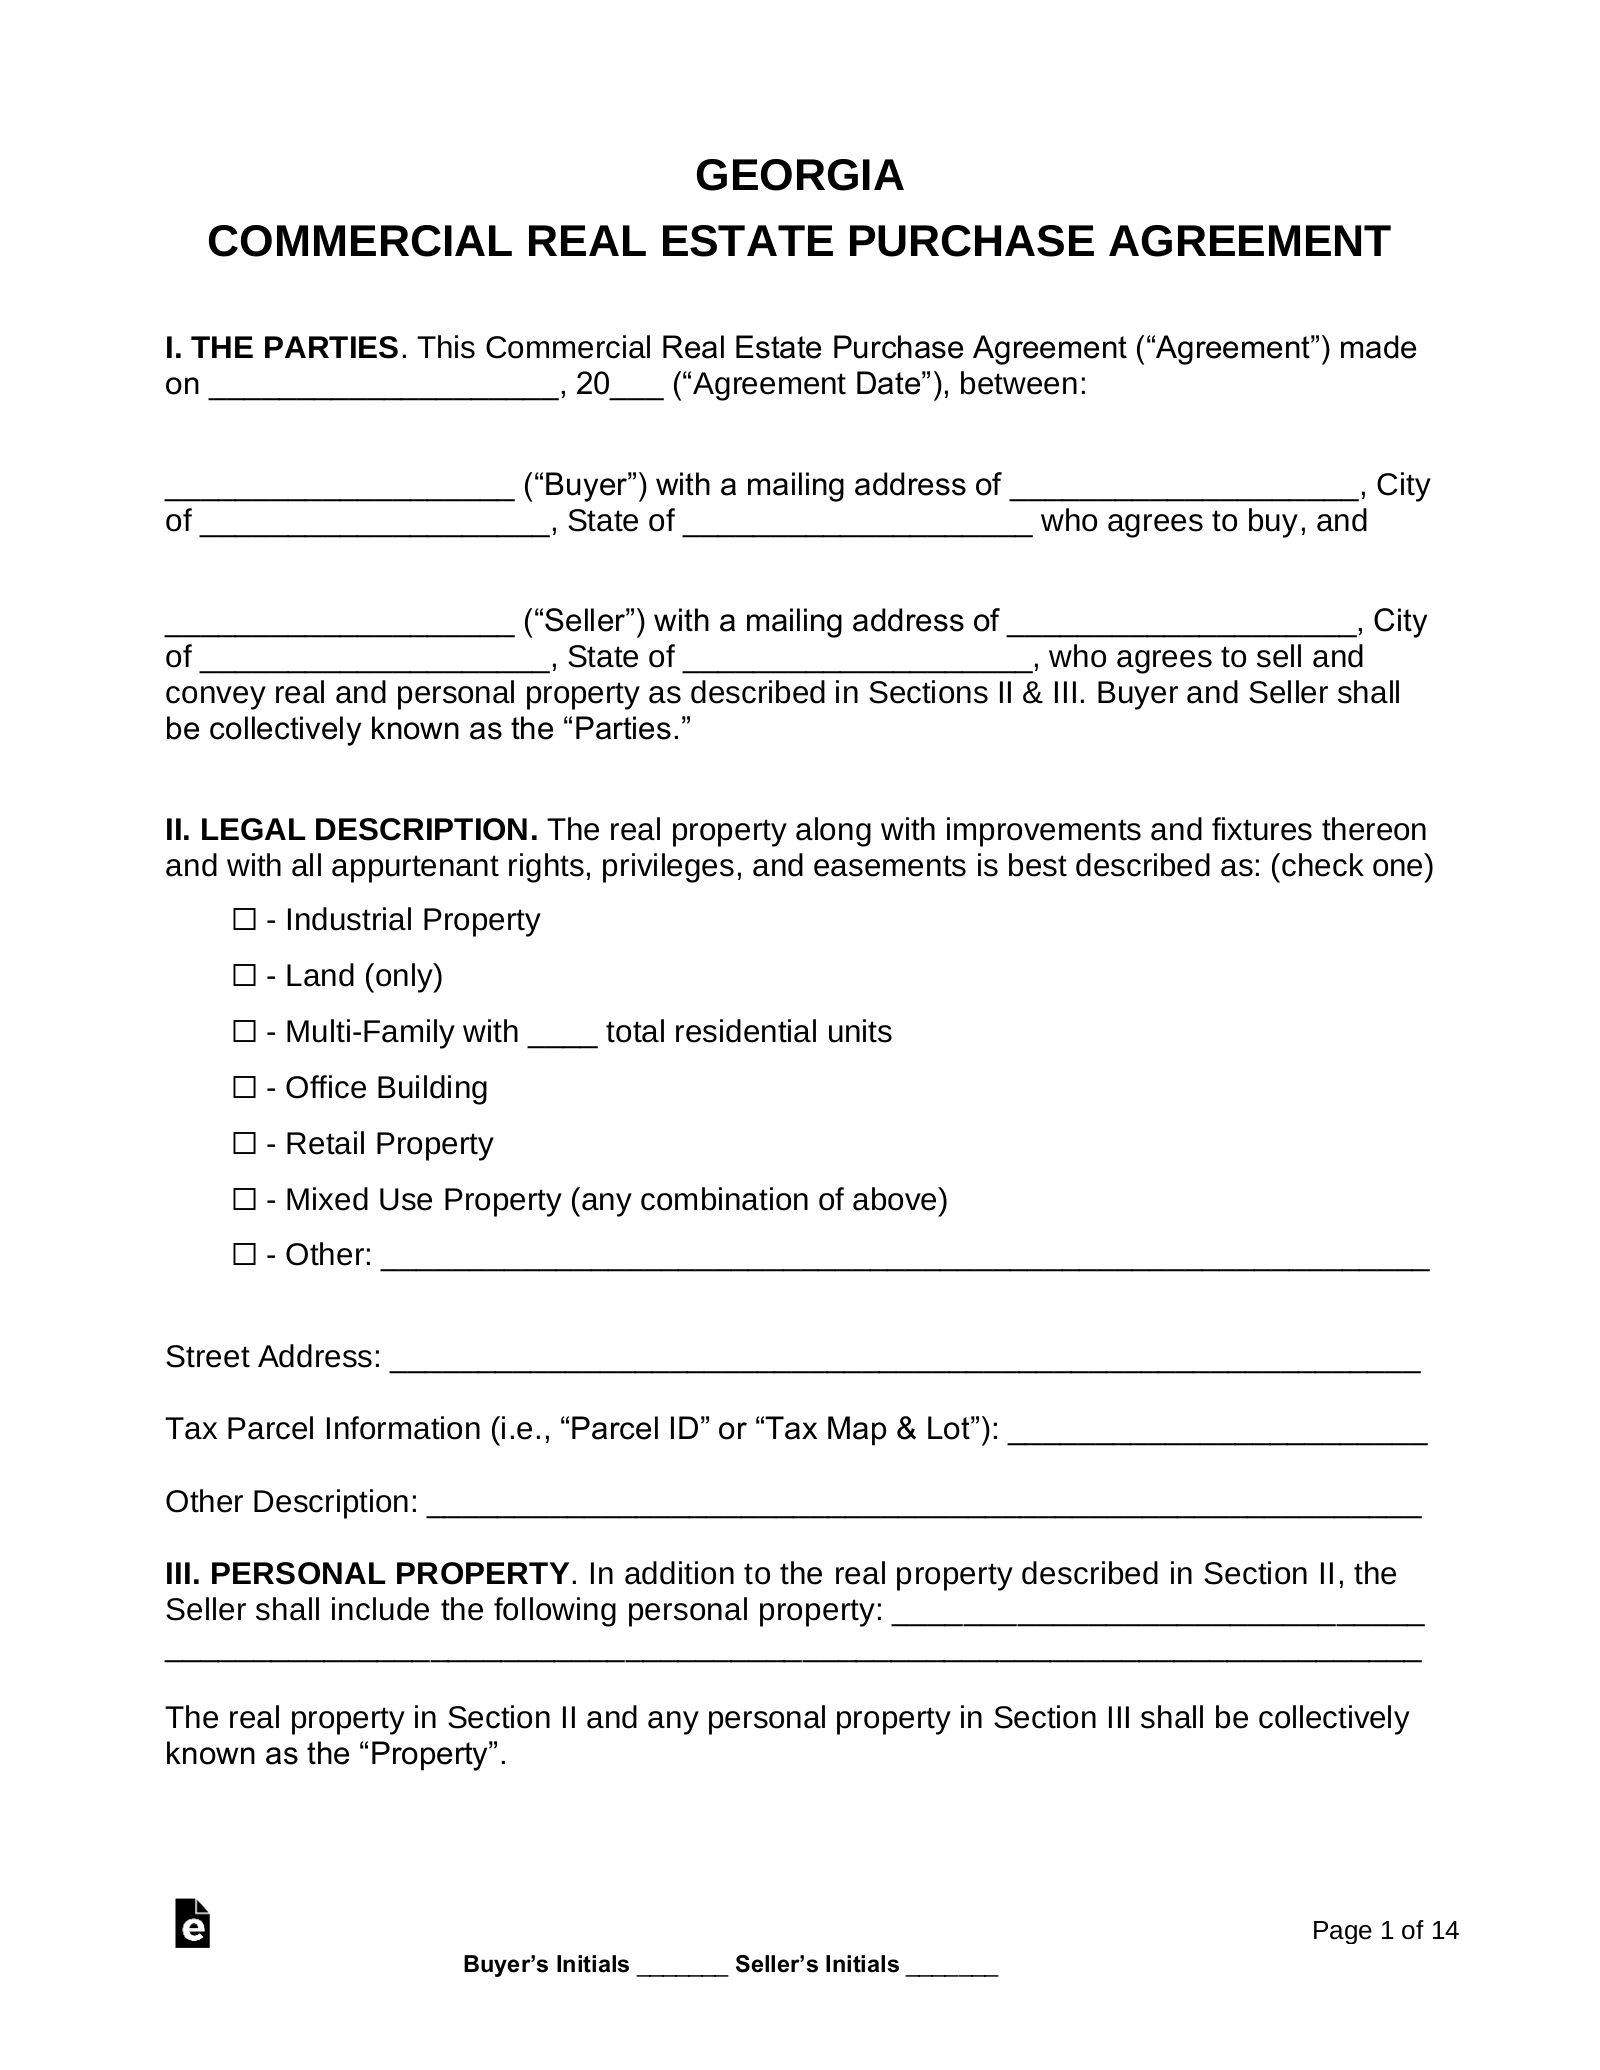 Georgia Commercial Real Estate Purchase and Sale Agreement